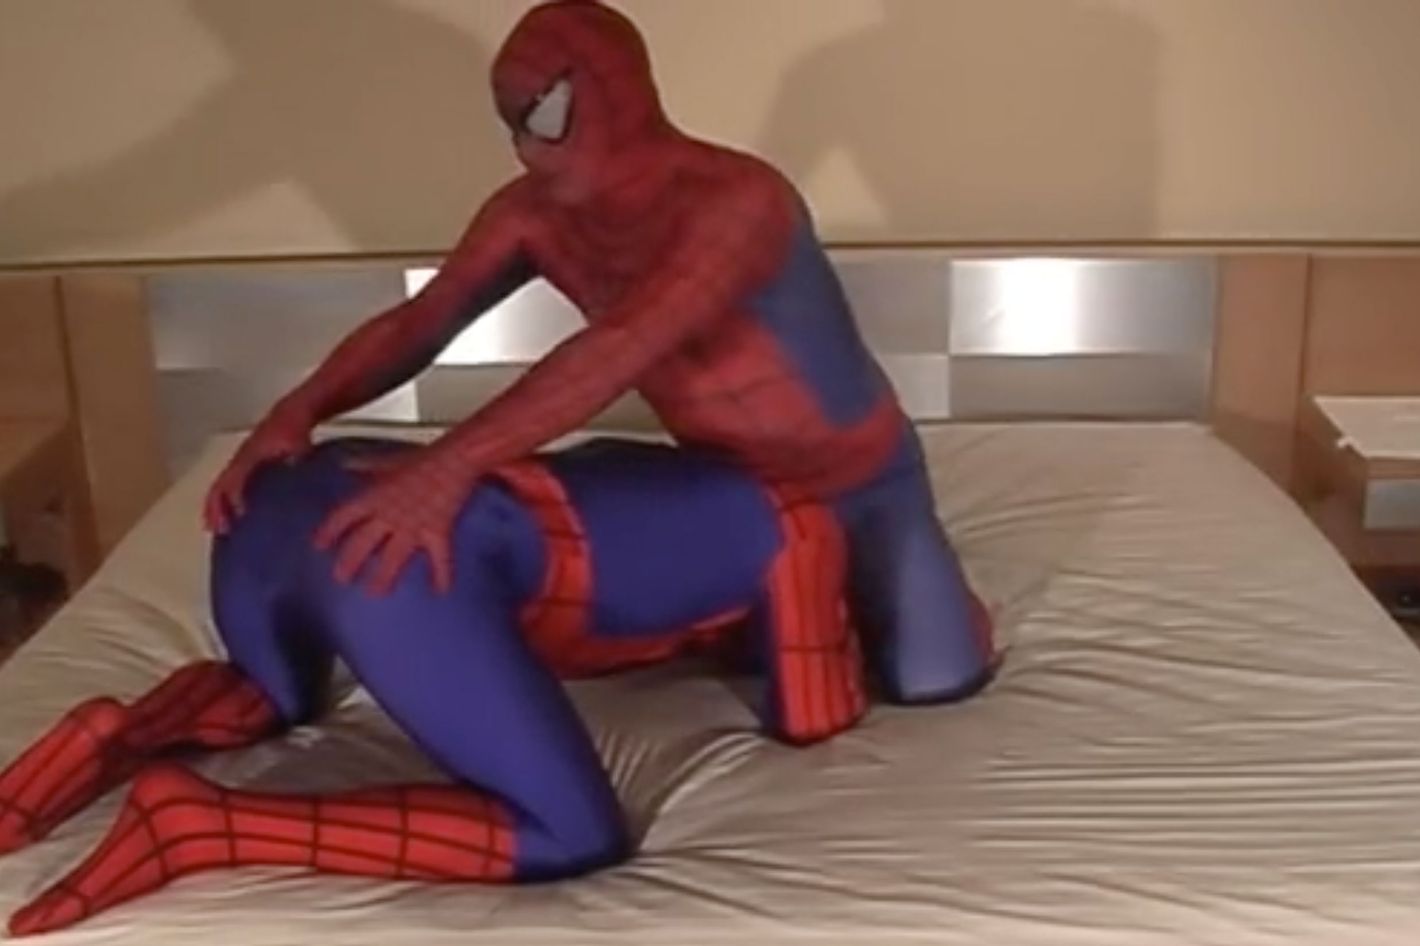 Who Made the Viral Spider-Man Spanking Video?